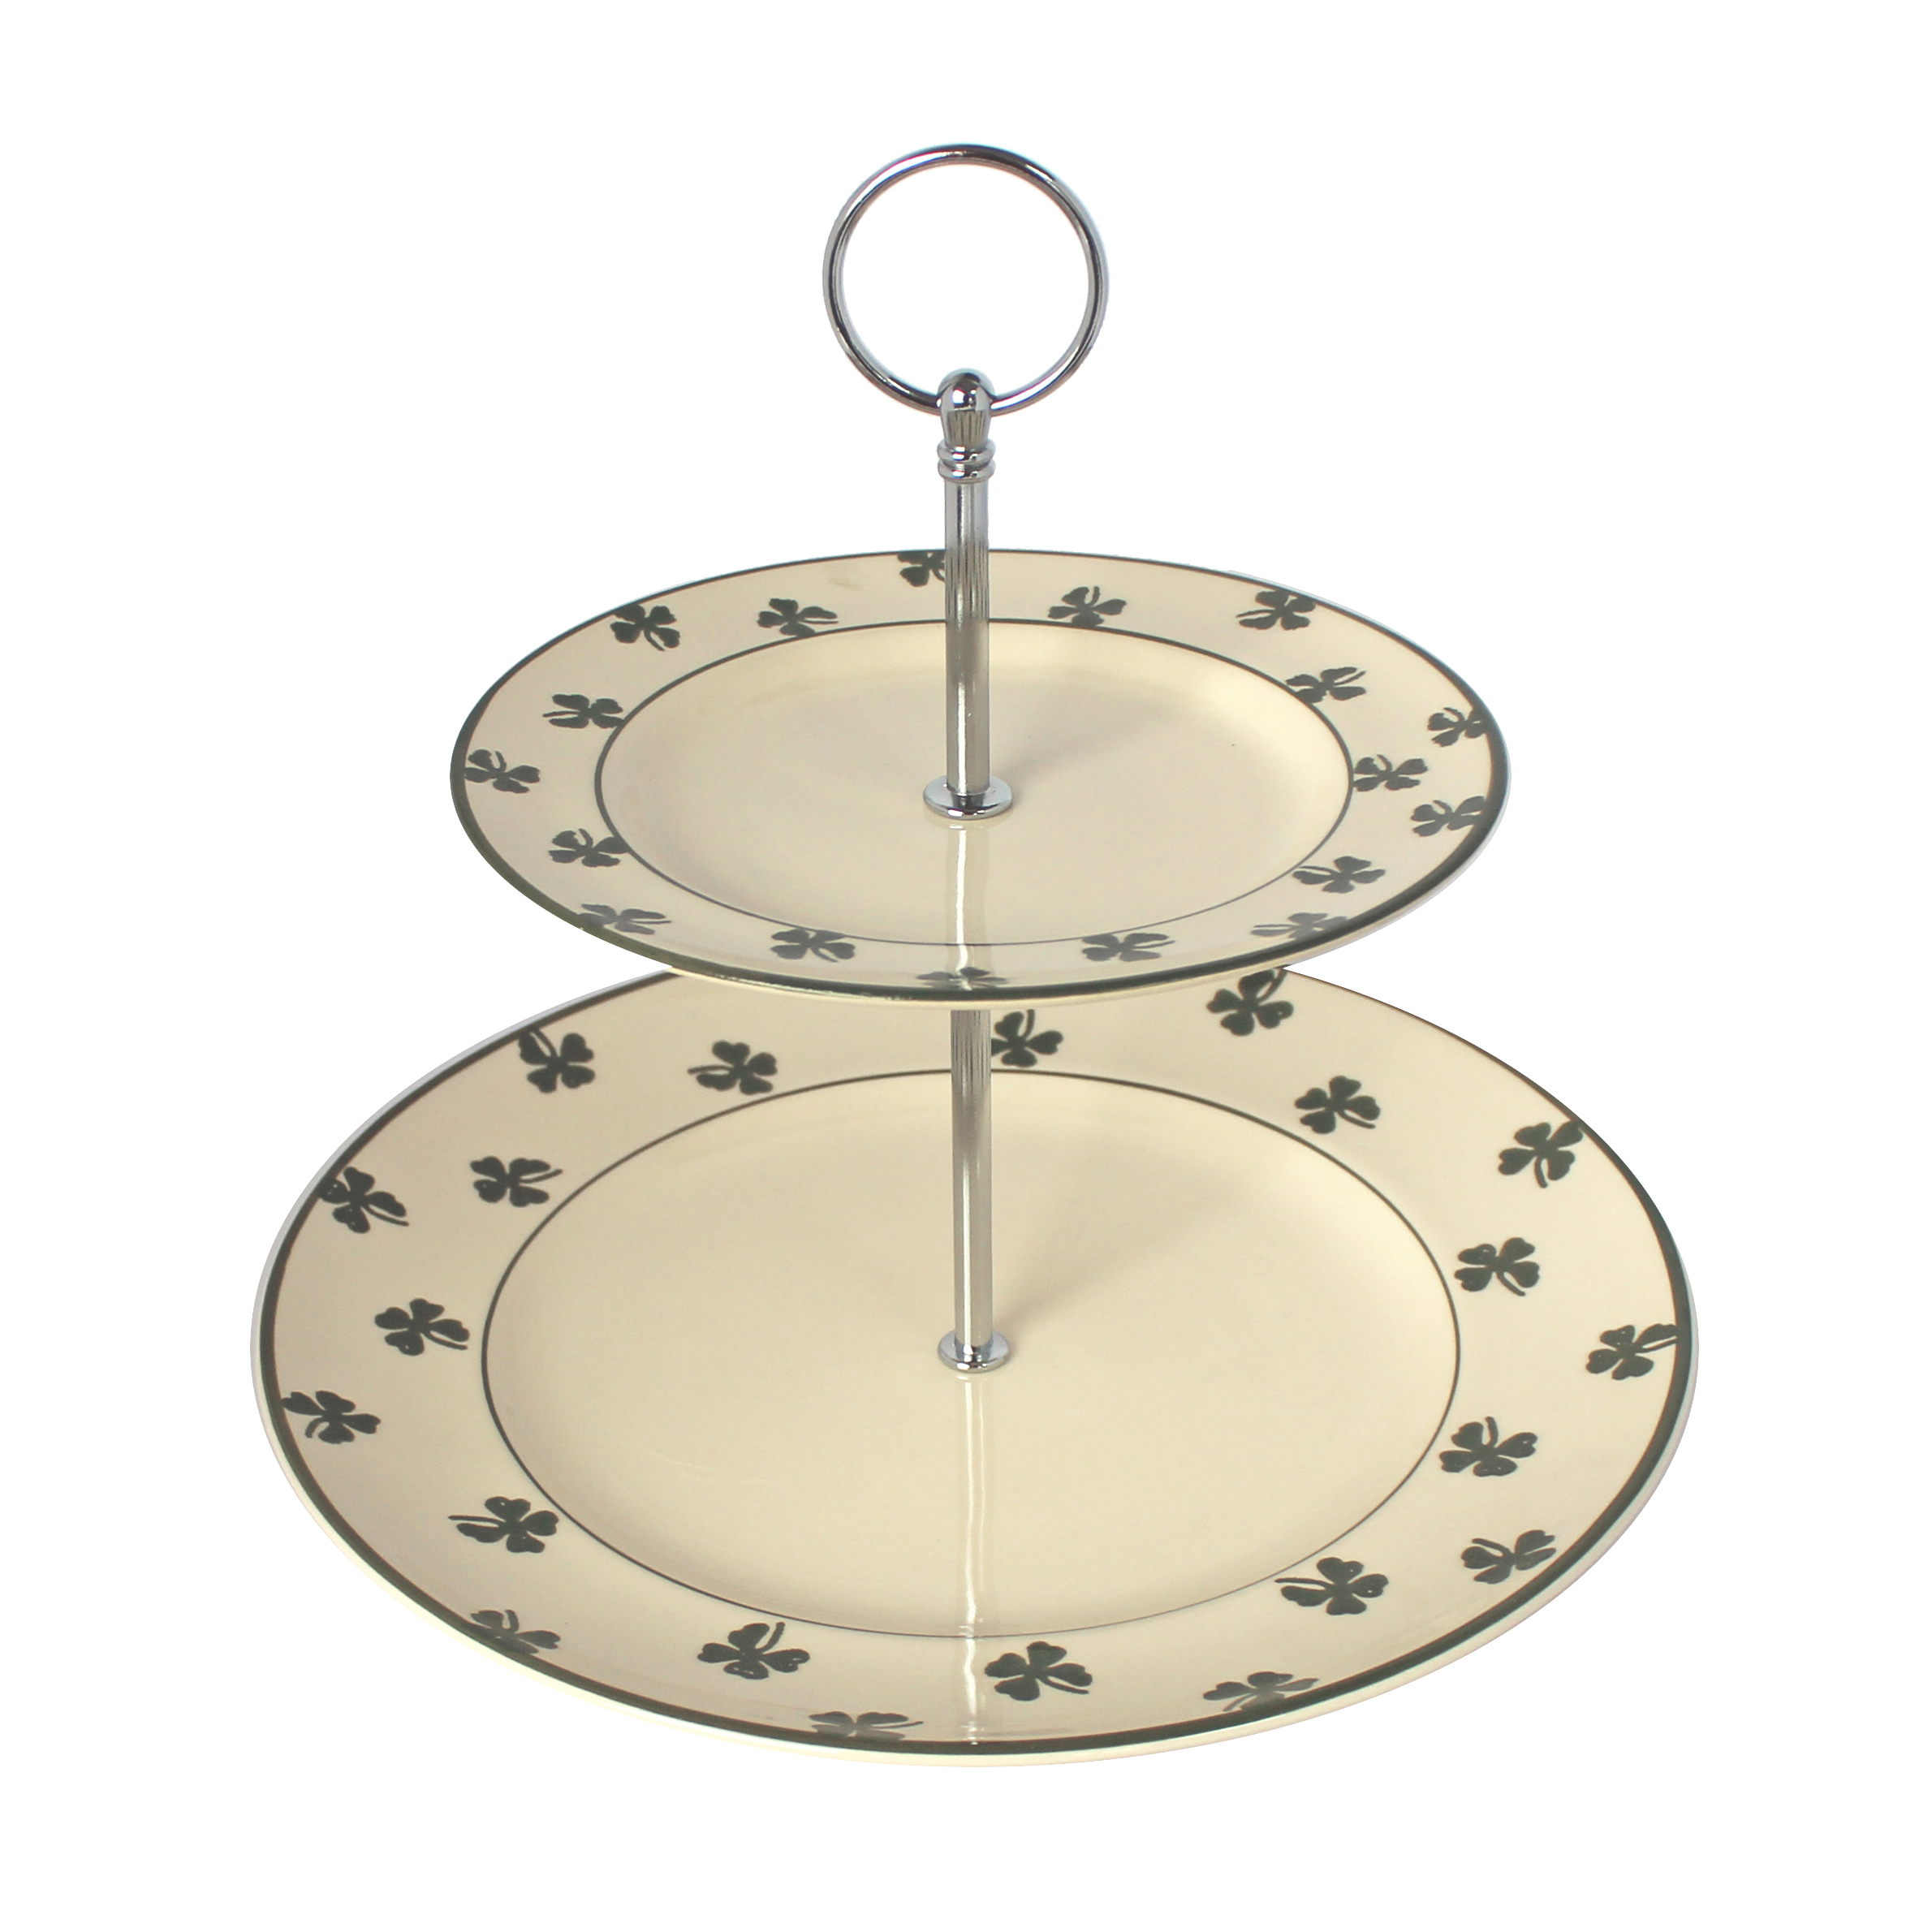 Brixton Four Leaf Clover Cake Stand 2 Tier Gift